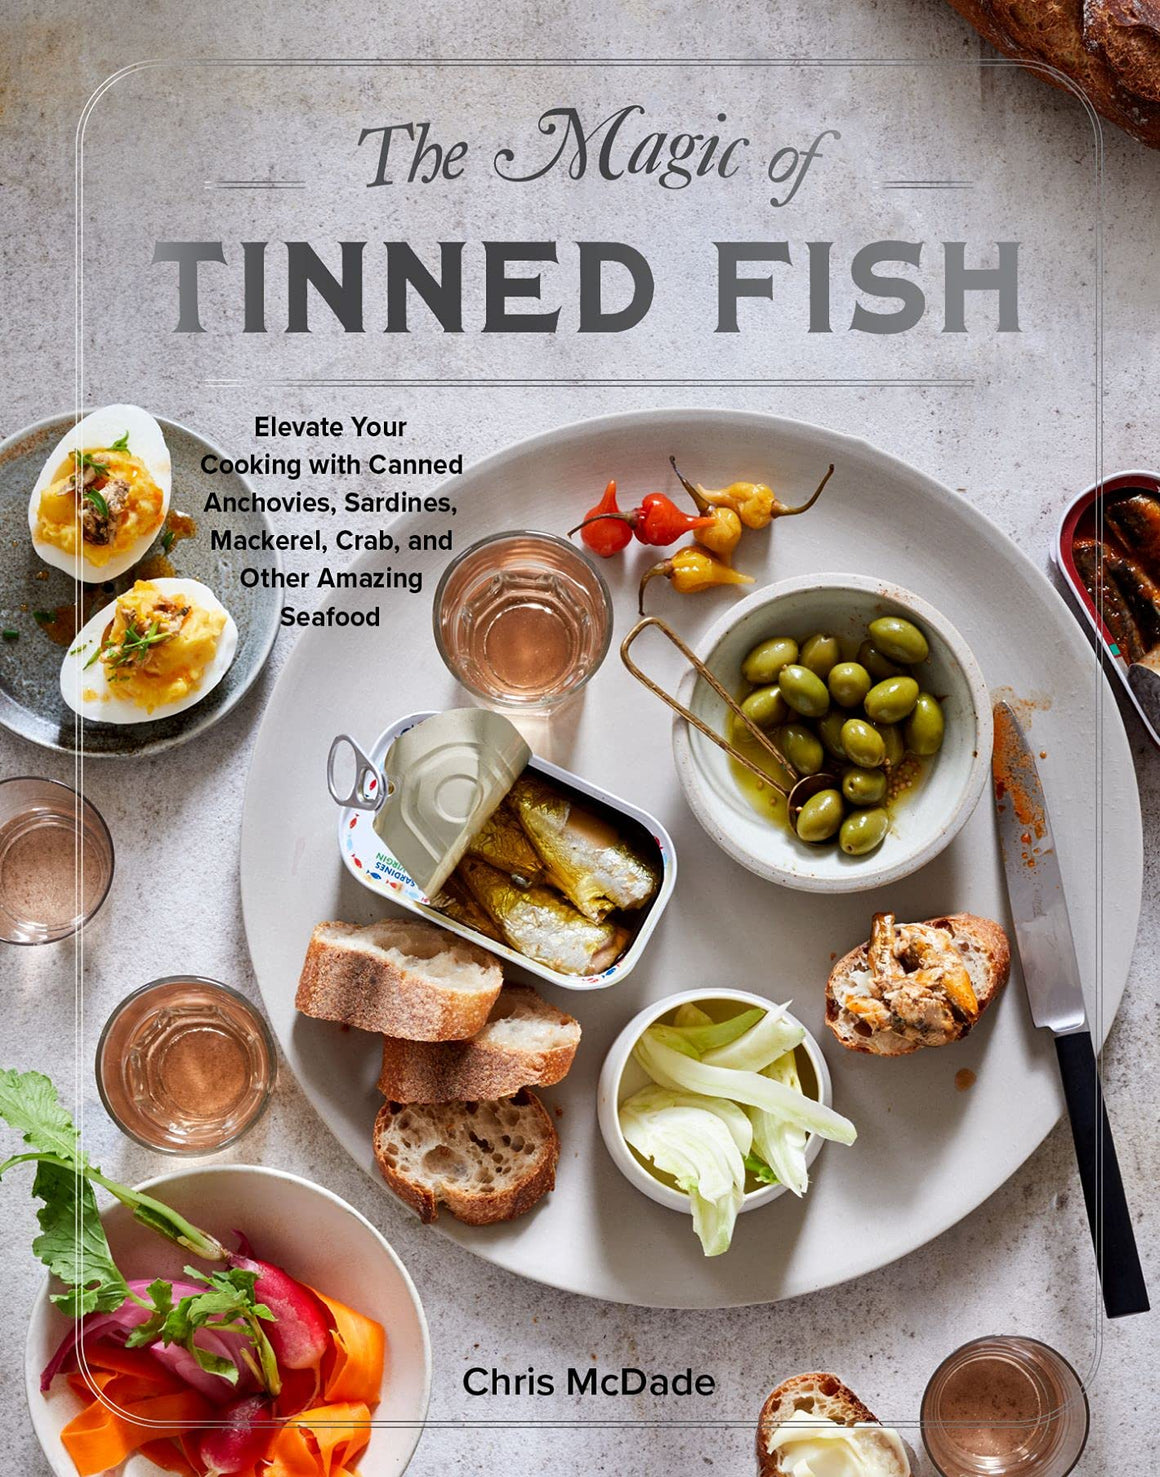 The Magic of Tinned Fish: Elevate Your Cooking with Canned Anchovies, Sardines, Mackerel, Crab, and Other Amazing Seafood (Chris McDade)